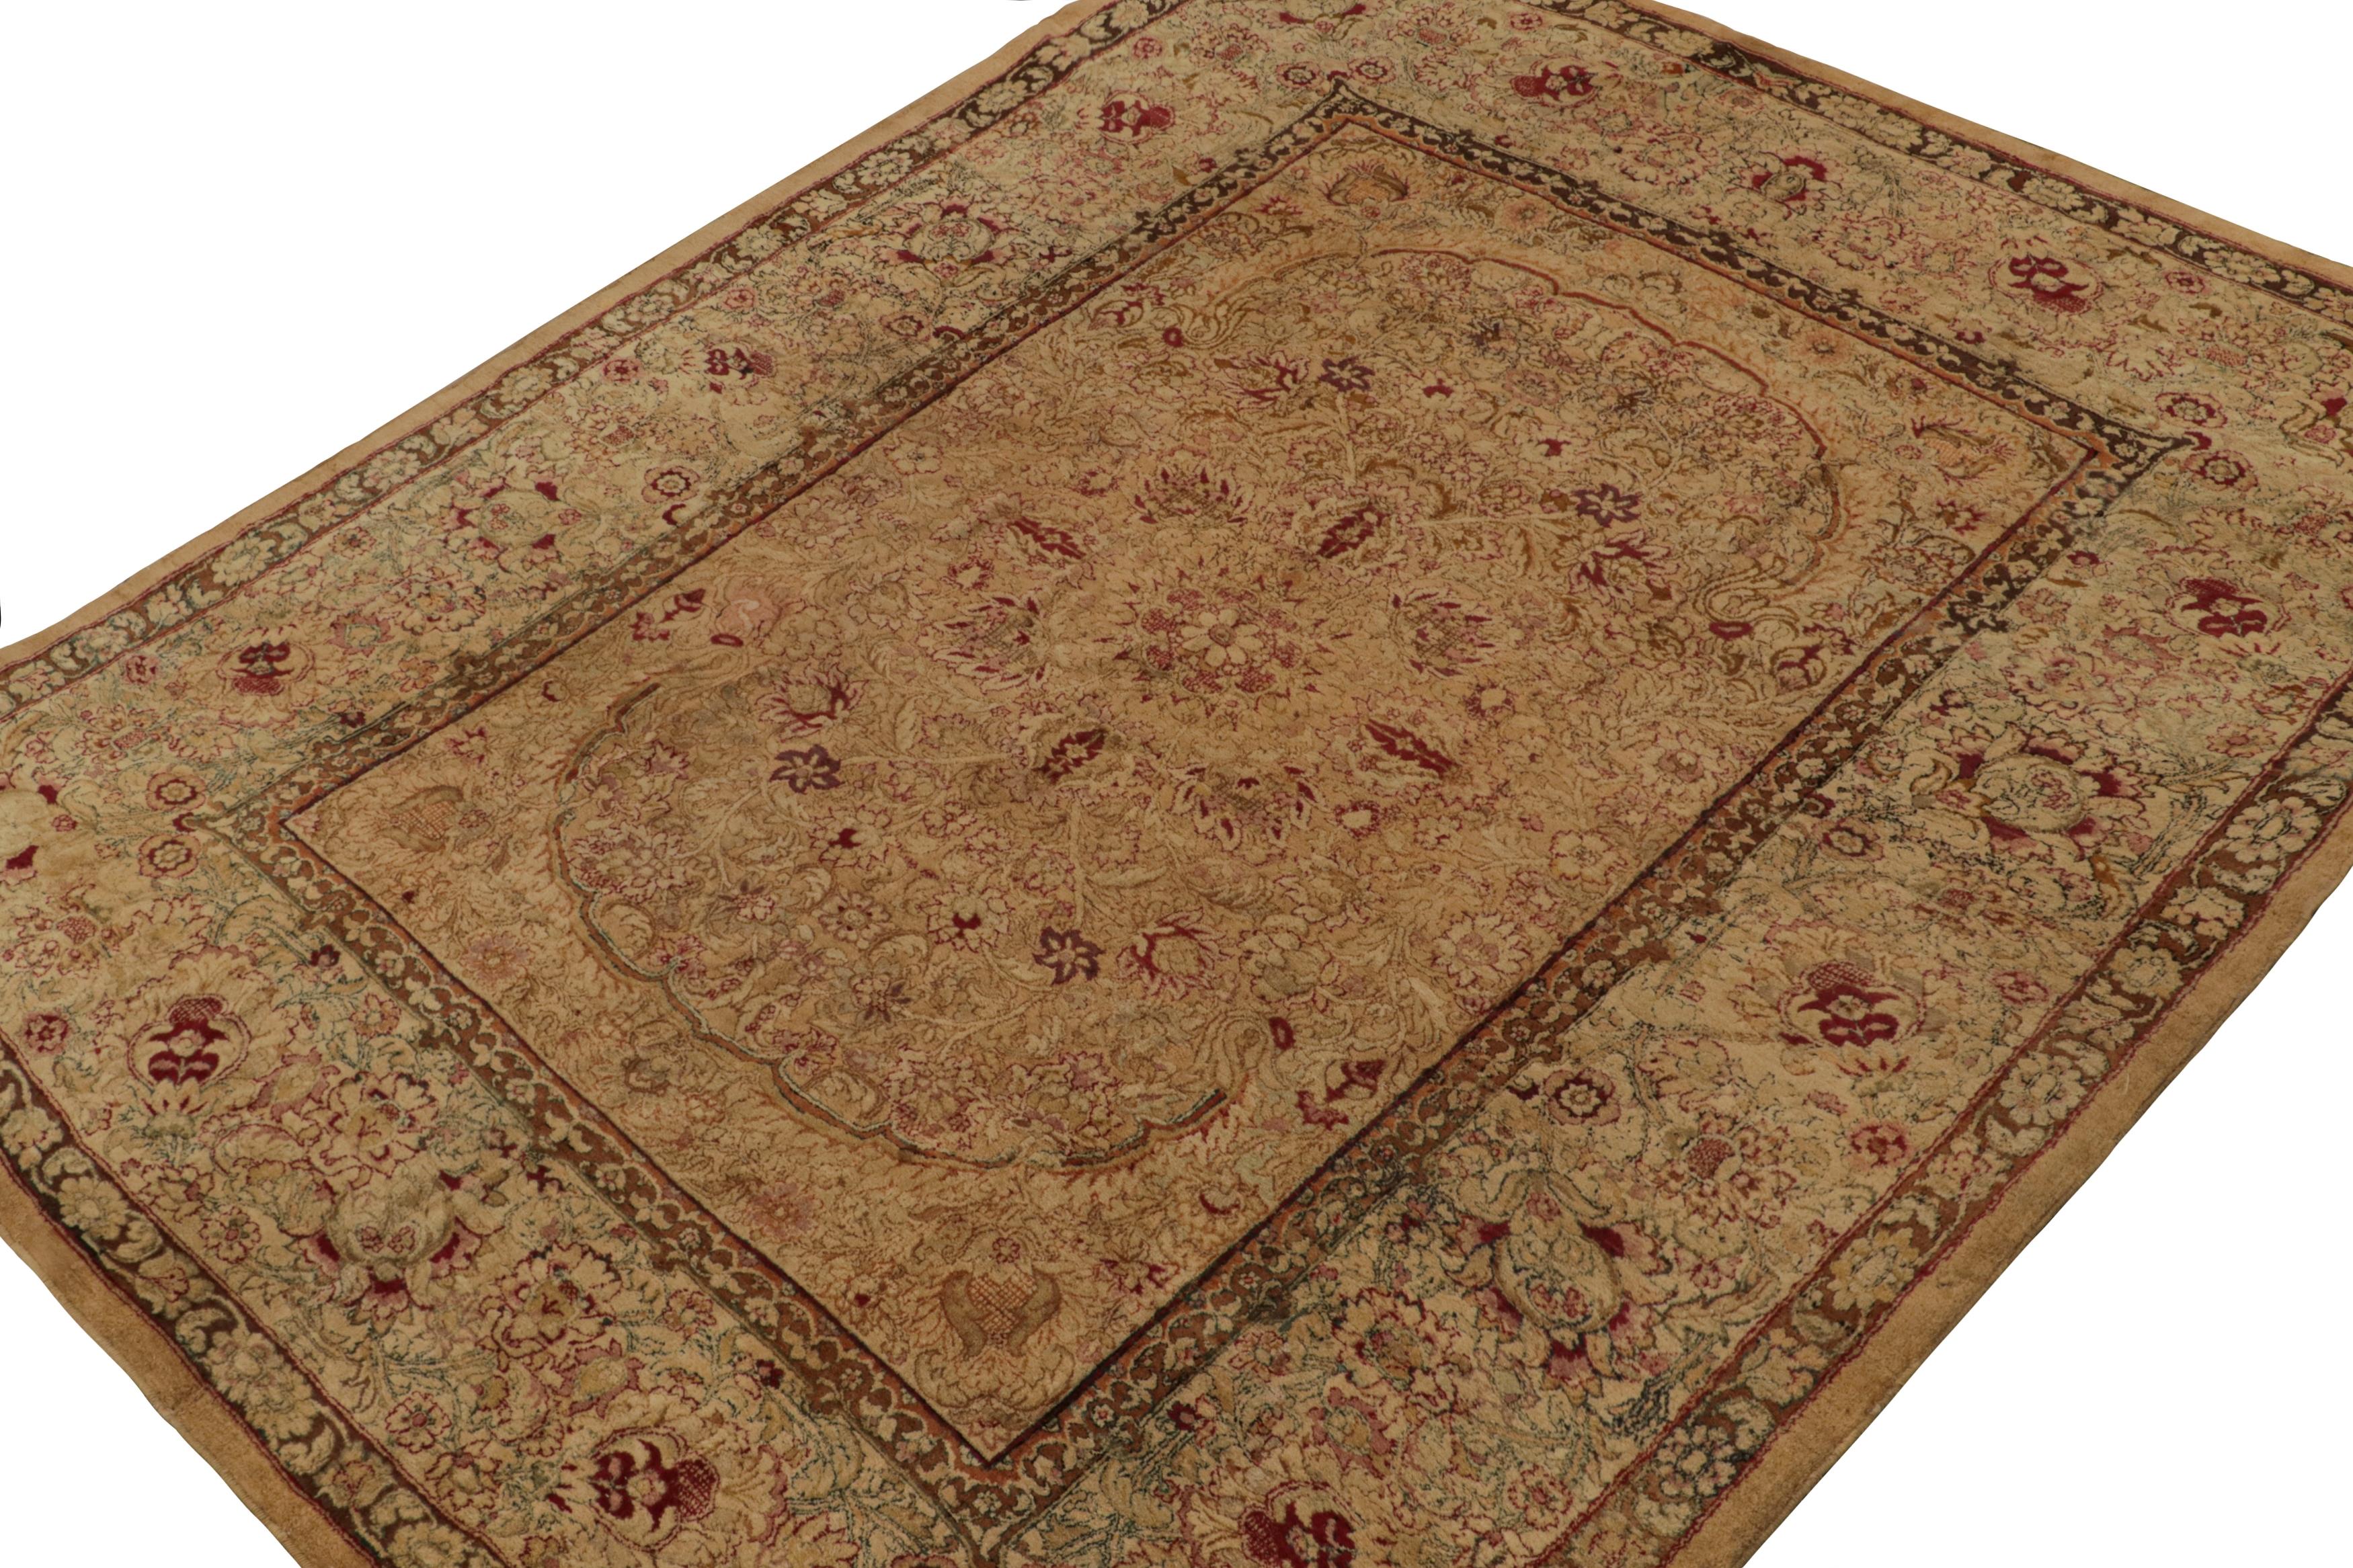 A very special rug for its design and detail for the 19th century period, this 9x11 antique Agra rug, in brown and gold field, with floral patterns in beige, red and green tones, is in a pristine condition, making it a rare masterpiece. 

On the